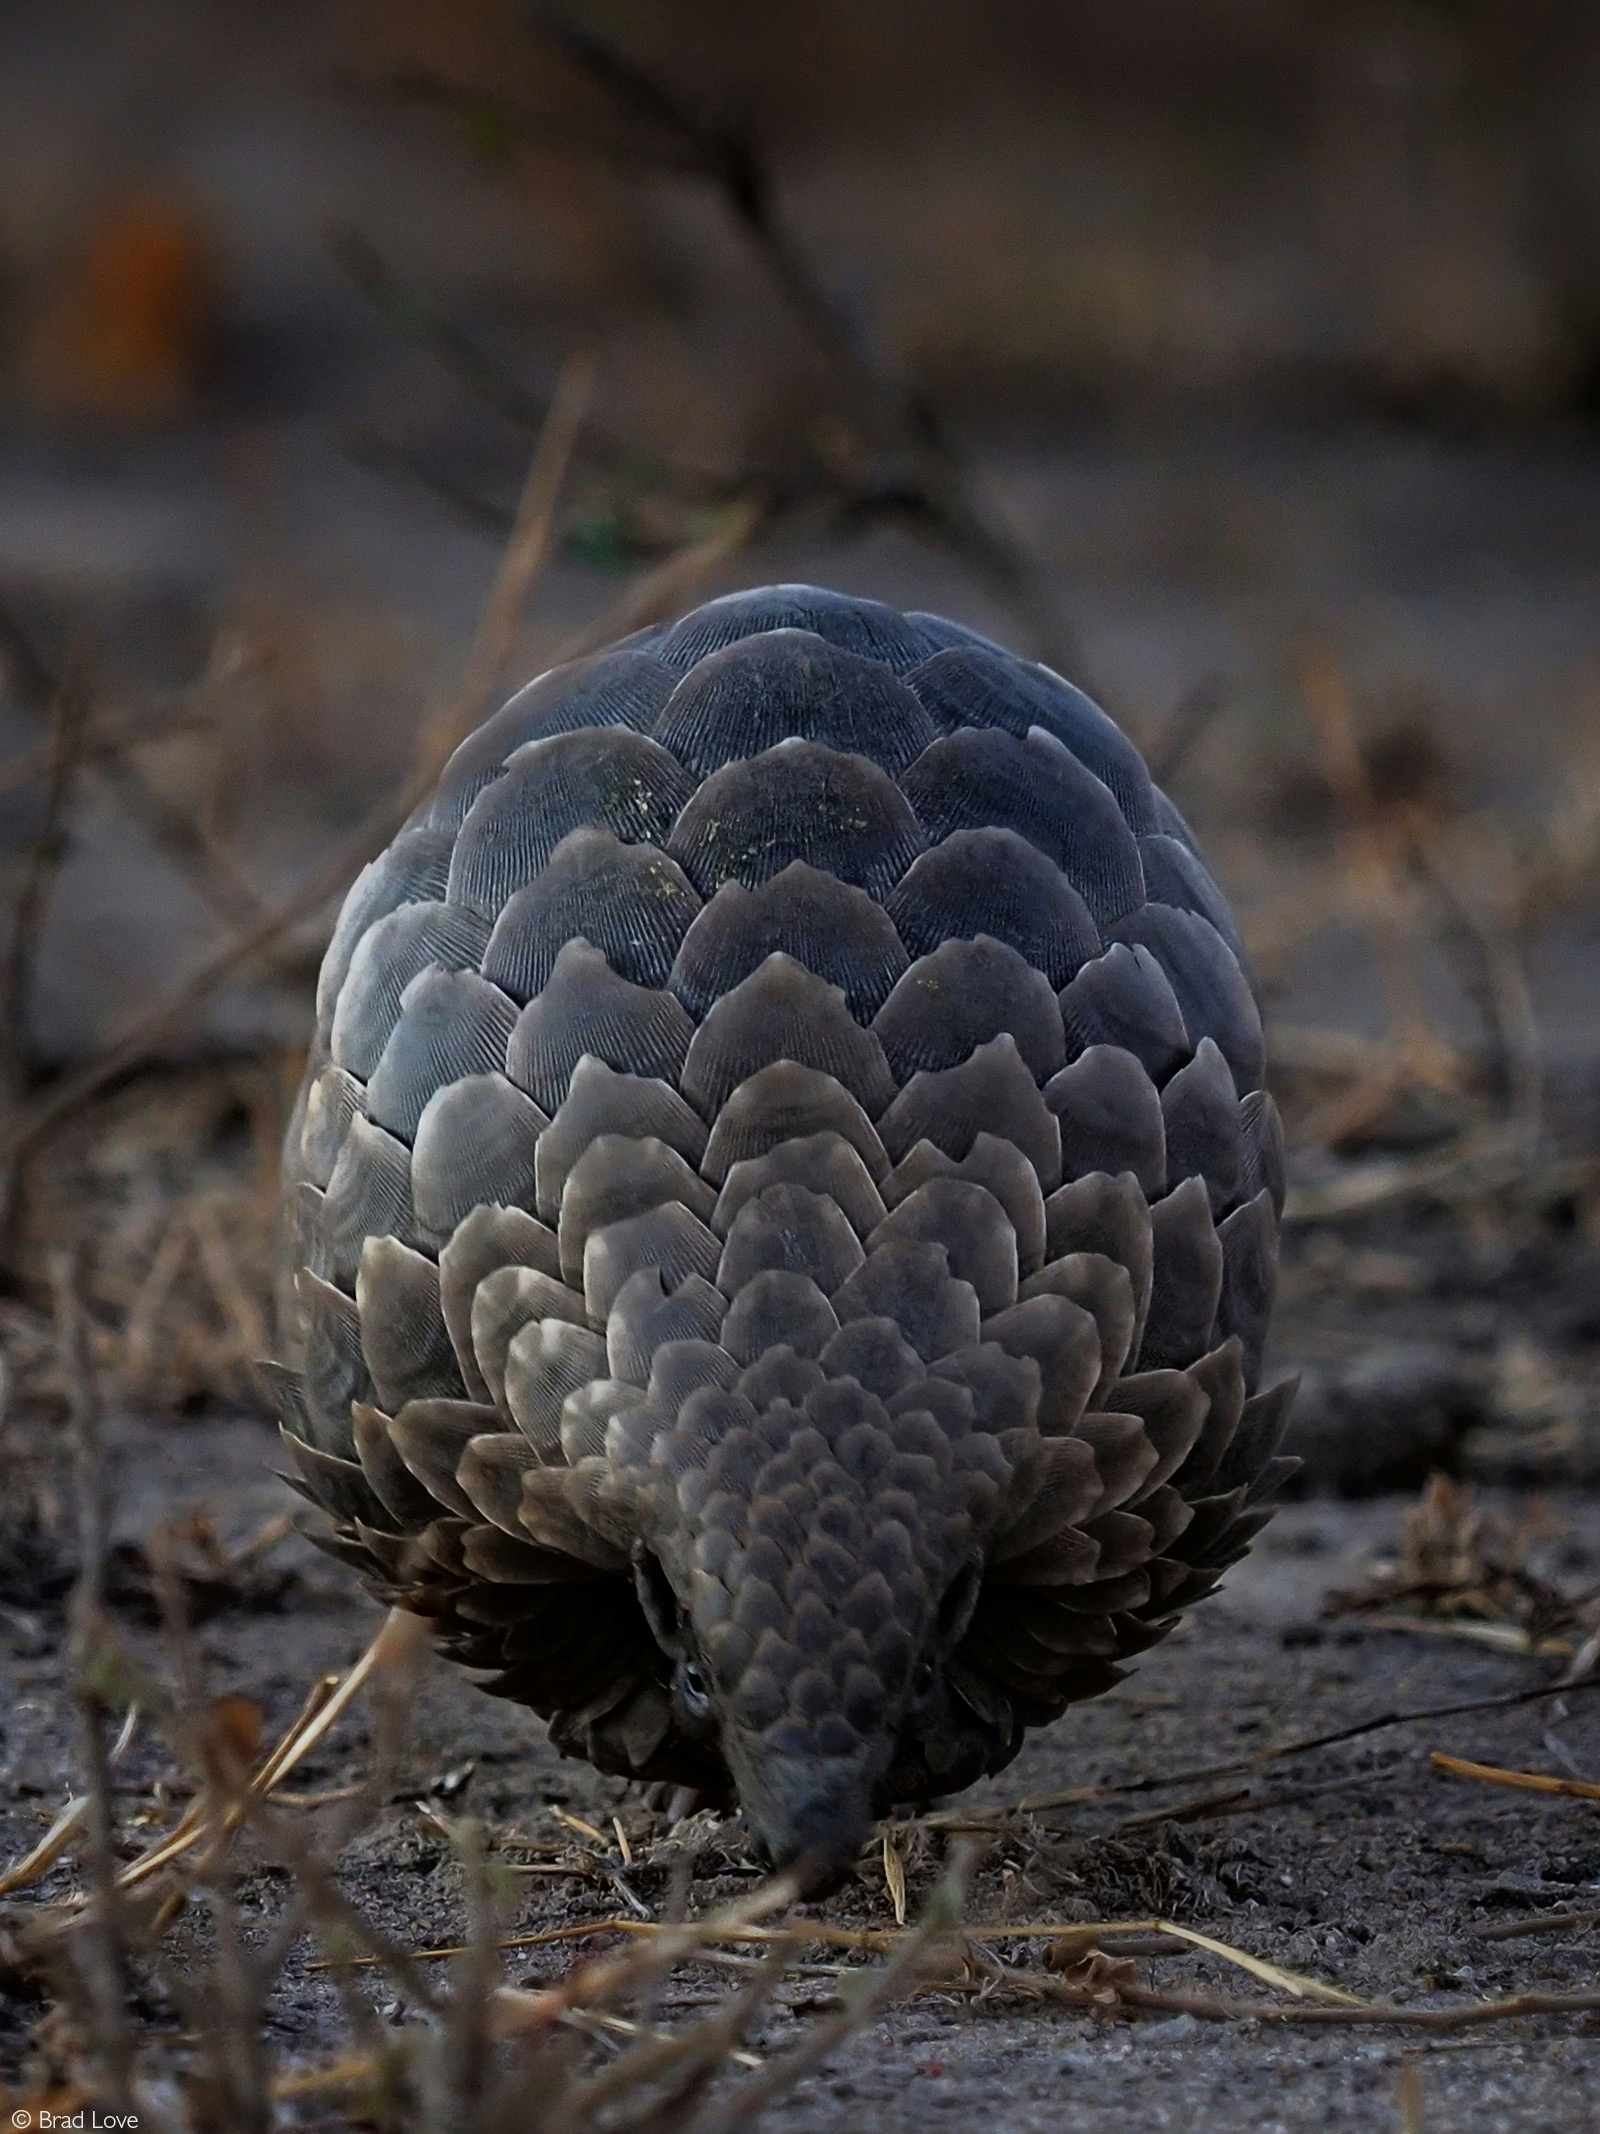 A ground pangolin, also known as Temminck's pangolin, foraging for ants and termites. South Africa © Brad Love